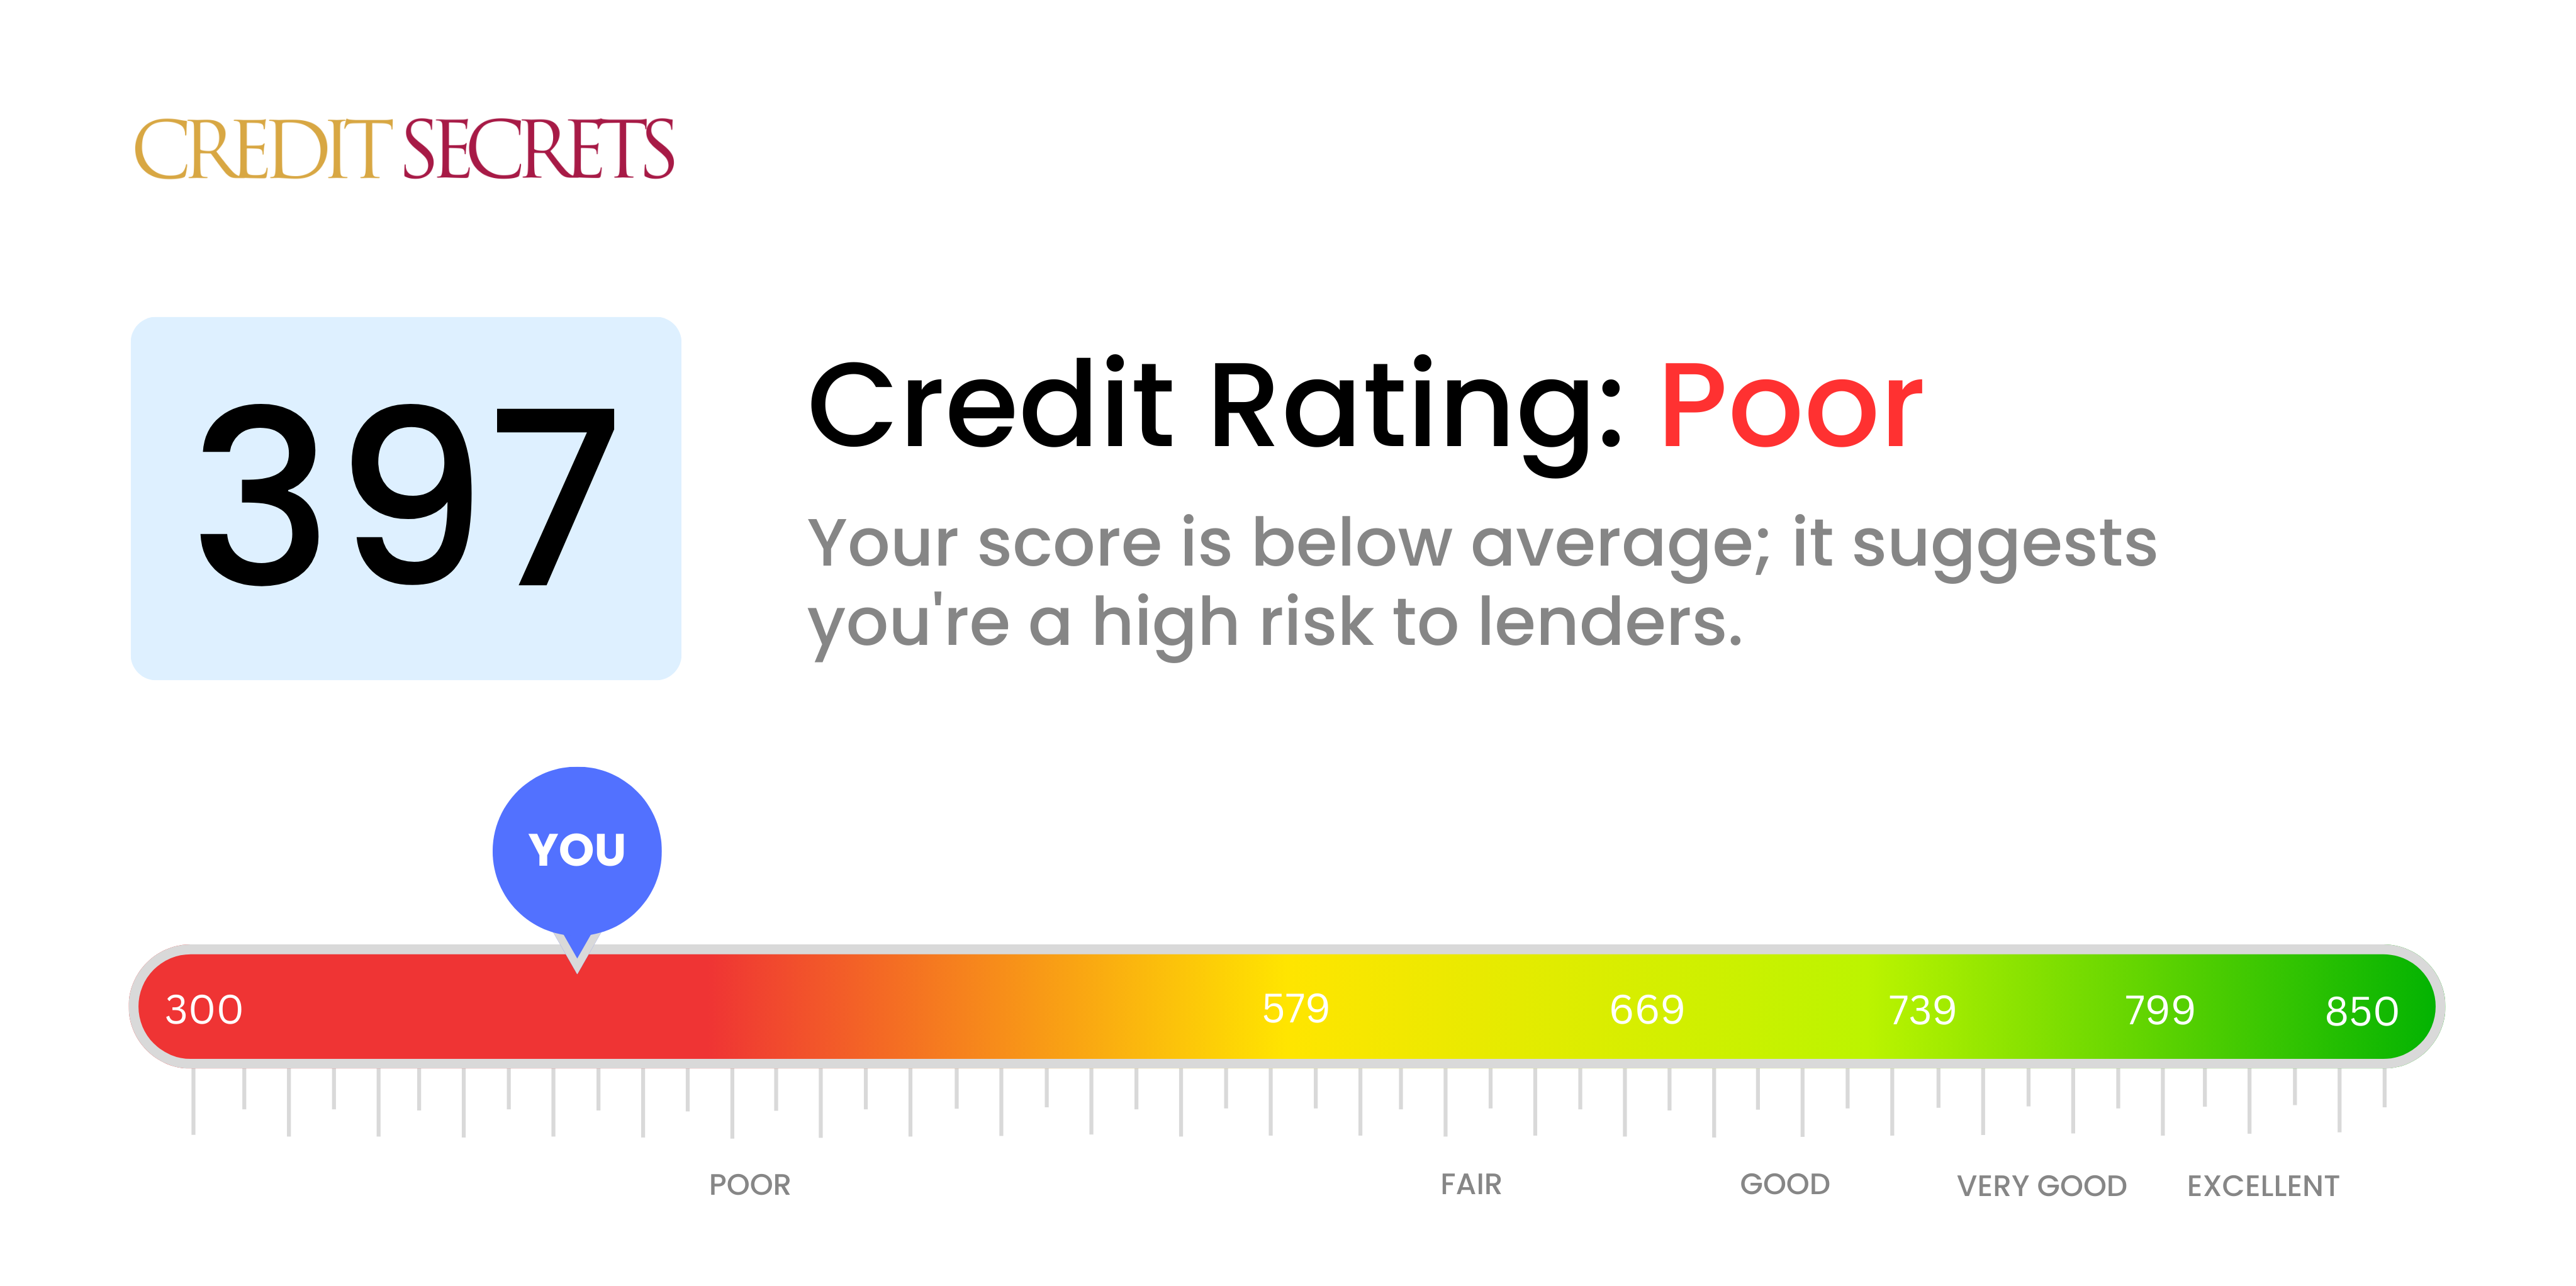 Is 397 a good credit score?